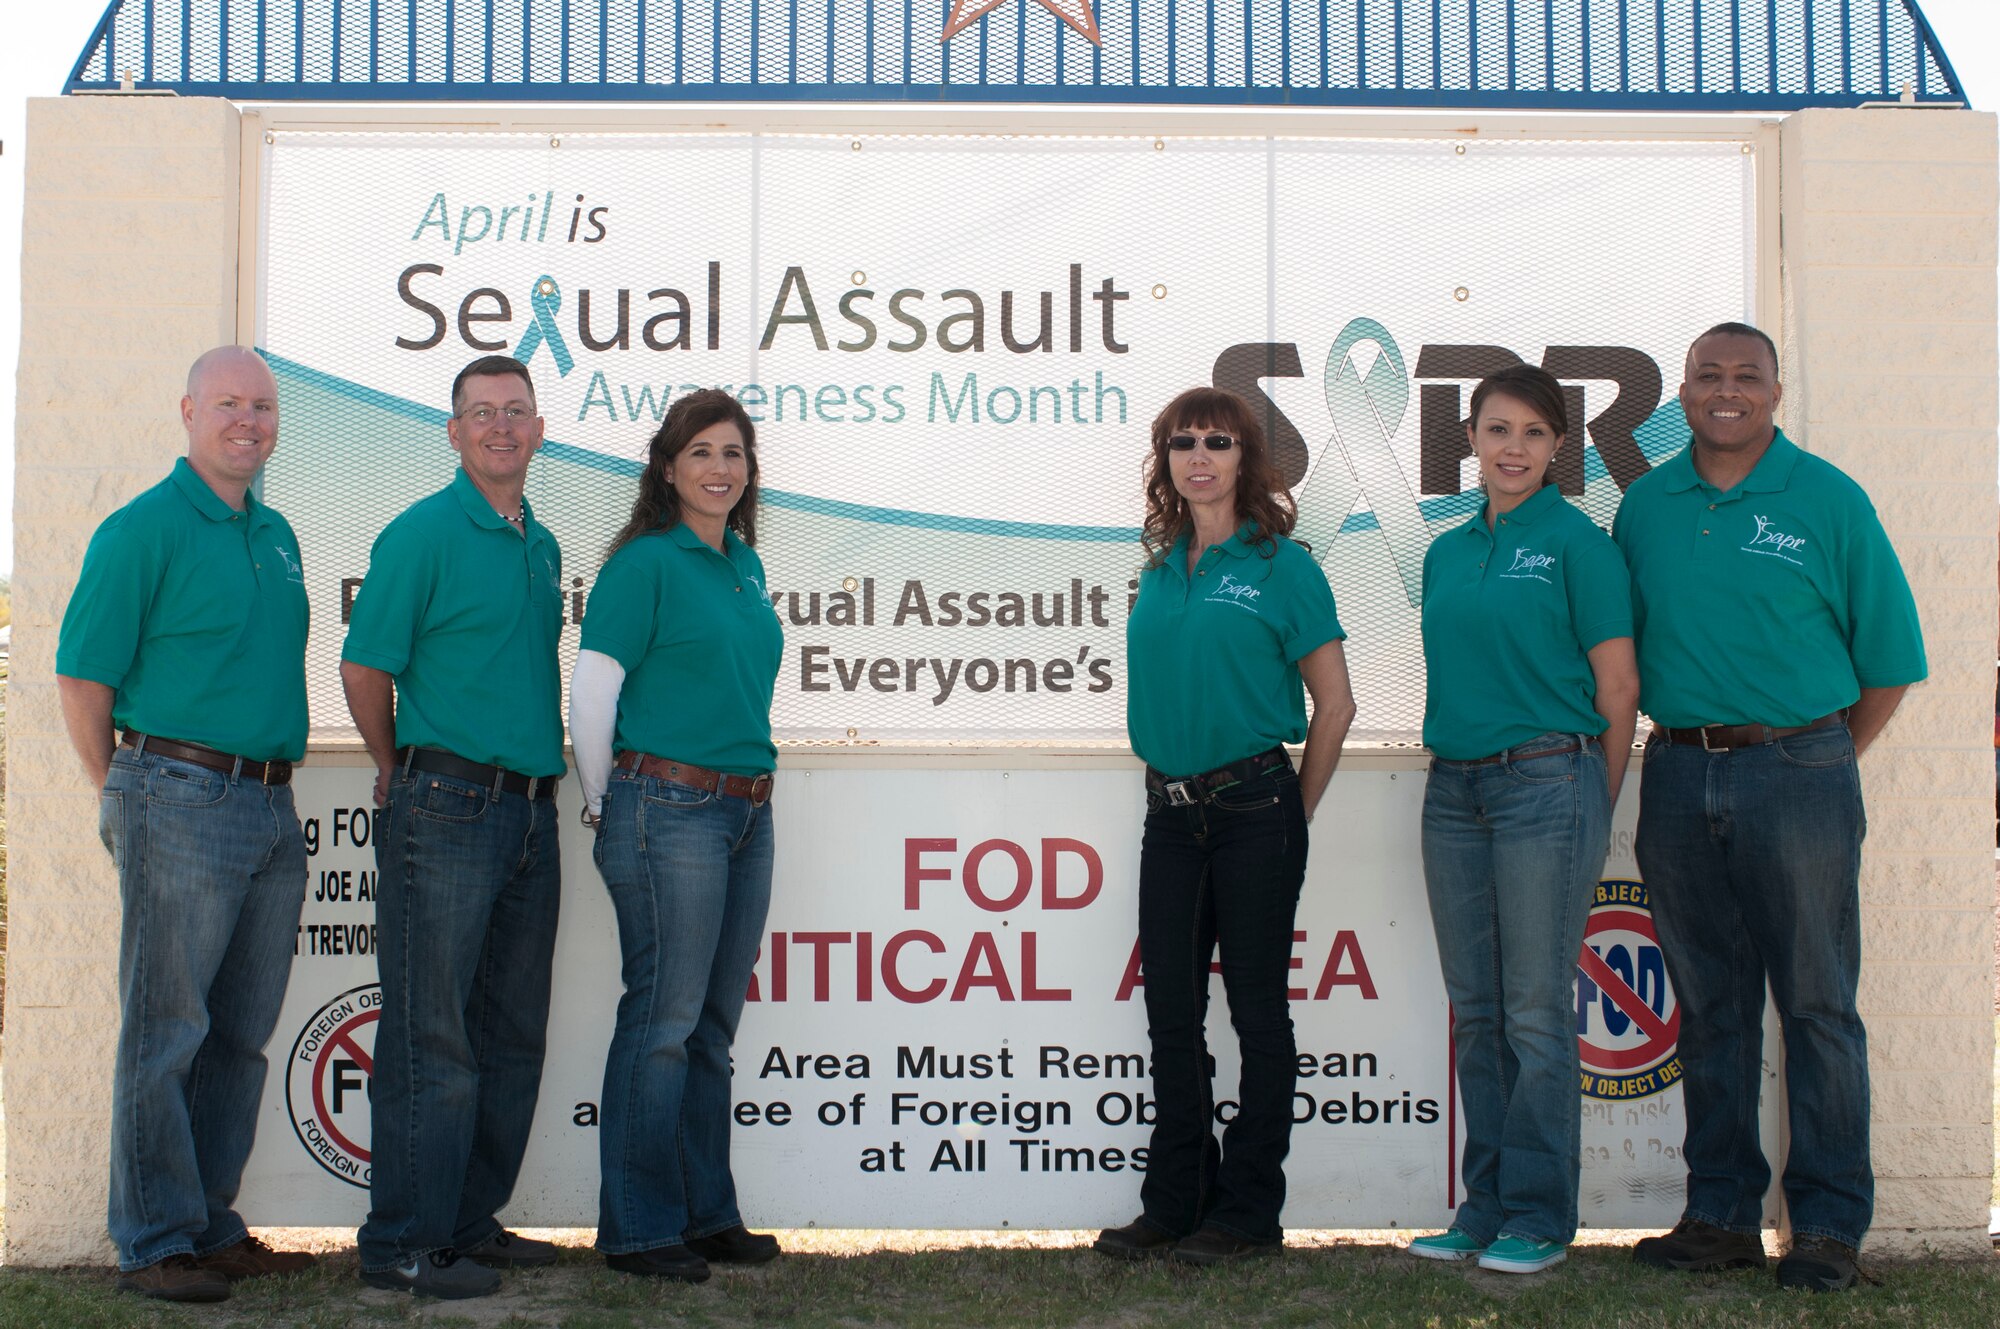 The 162nd Wing Sexual Assault Prevention and Response team dressed in jeans and teal shirts for Denim Day 2014, being honored April 18 here at the wing. The team members are, from left to right: Maj. Stephen Moorhead, Sexual Assault Response Coordinator, Master Sgt. Brent Thompson, victim advocate, Master Sgt. Marnie Jewell-Johnson, victim advocate, Tech. Sgt. Mitzi Eggers, victim advocate, 1st Lt. Melissa Gonzalez, SARC, Master Sgt. Gary Jack, victim advocate. (U.S. Air National Guard photo by Tech. Sgt. Hollie Hansen/Released)